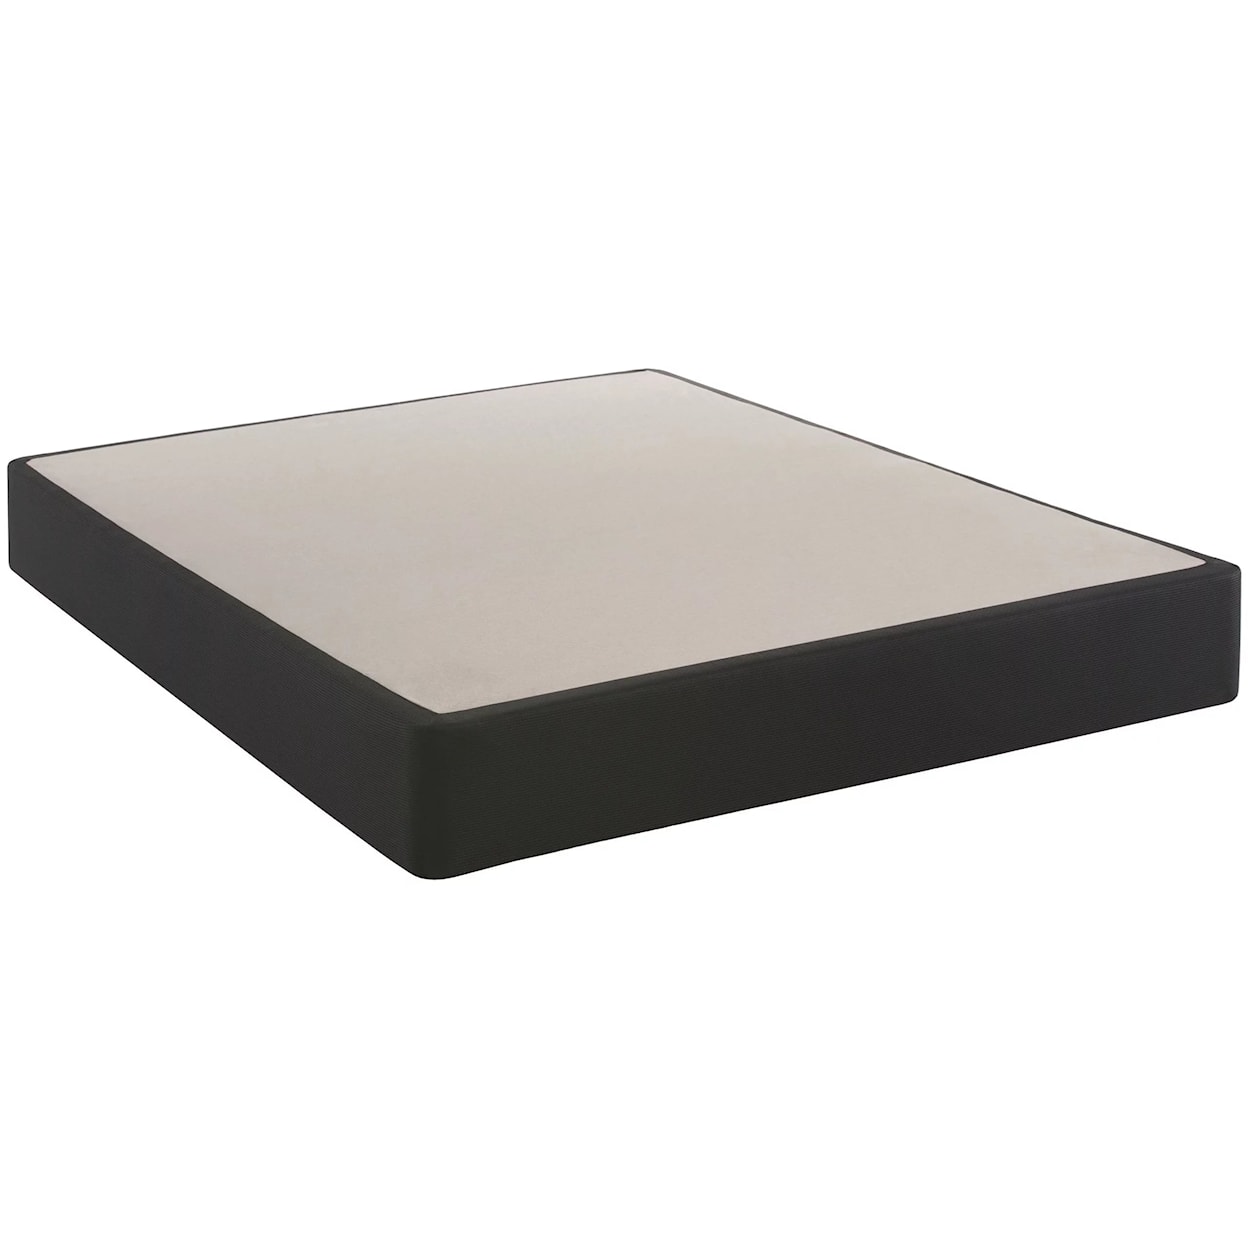 Justice Furniture Justice Bedding Foundations Queen Standard Base 9" Height